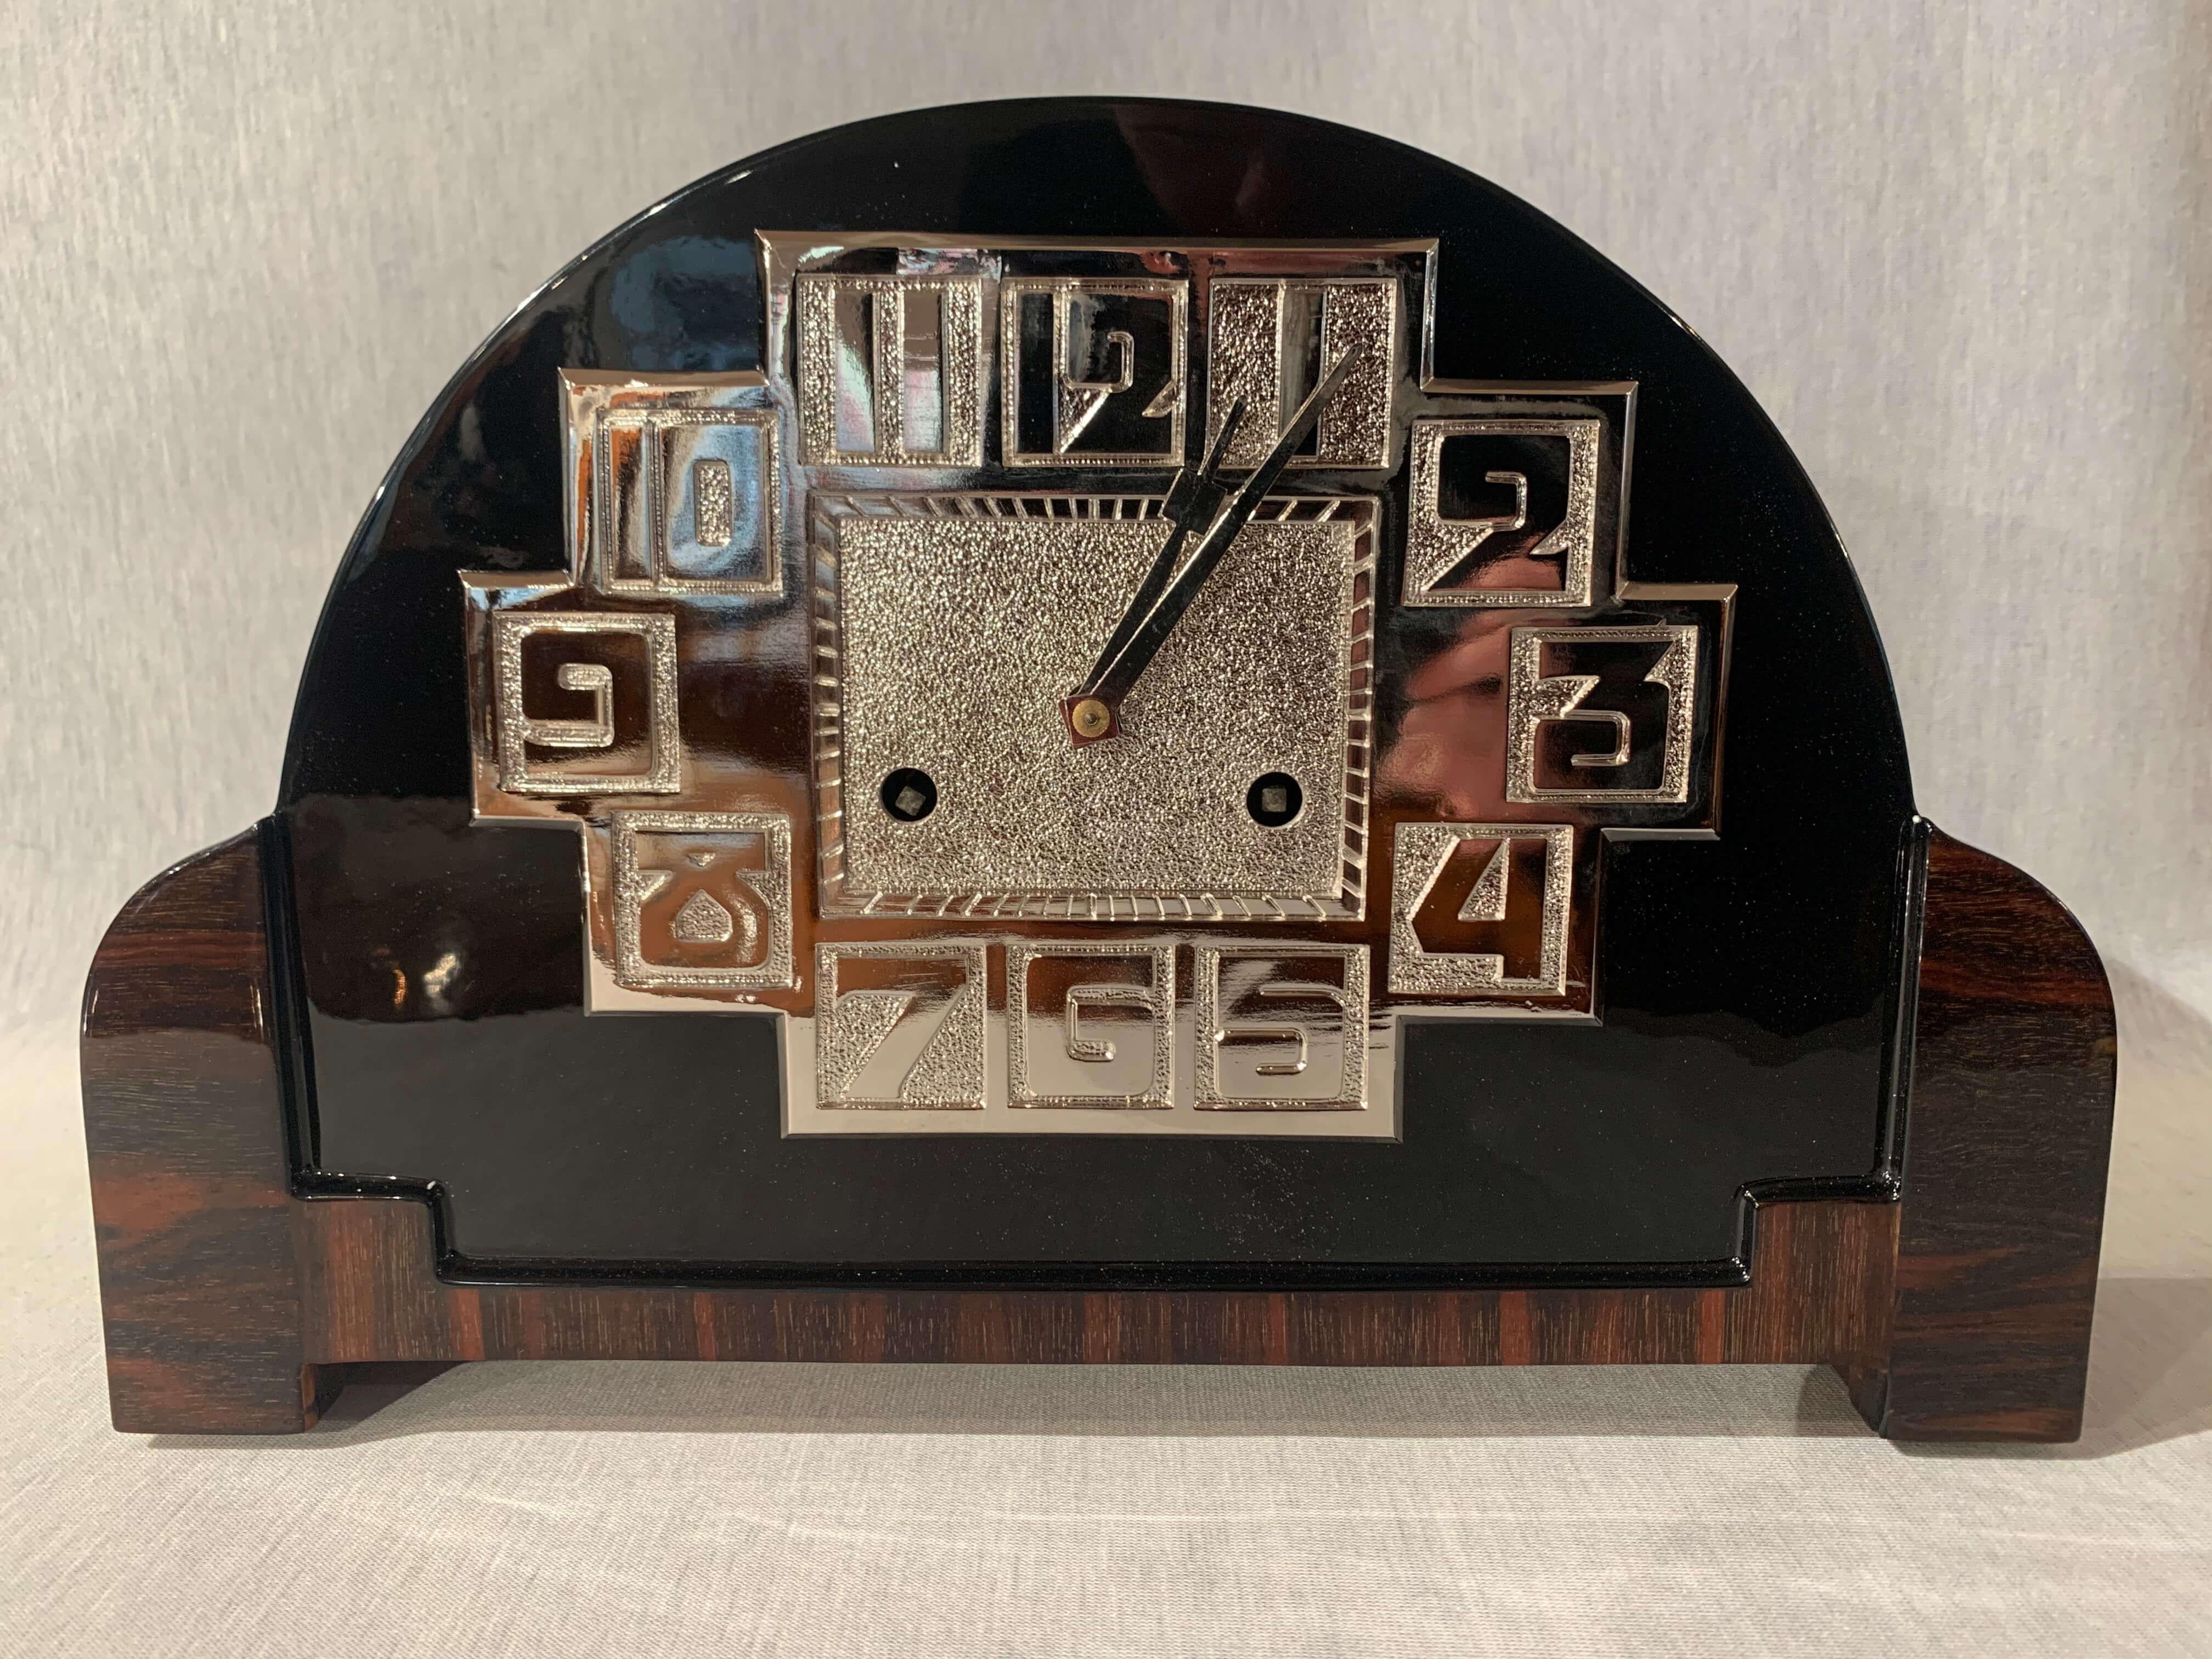 French Art Deco Table Clock, Macassar, Black Lacquer and Nickel, France circa 1930